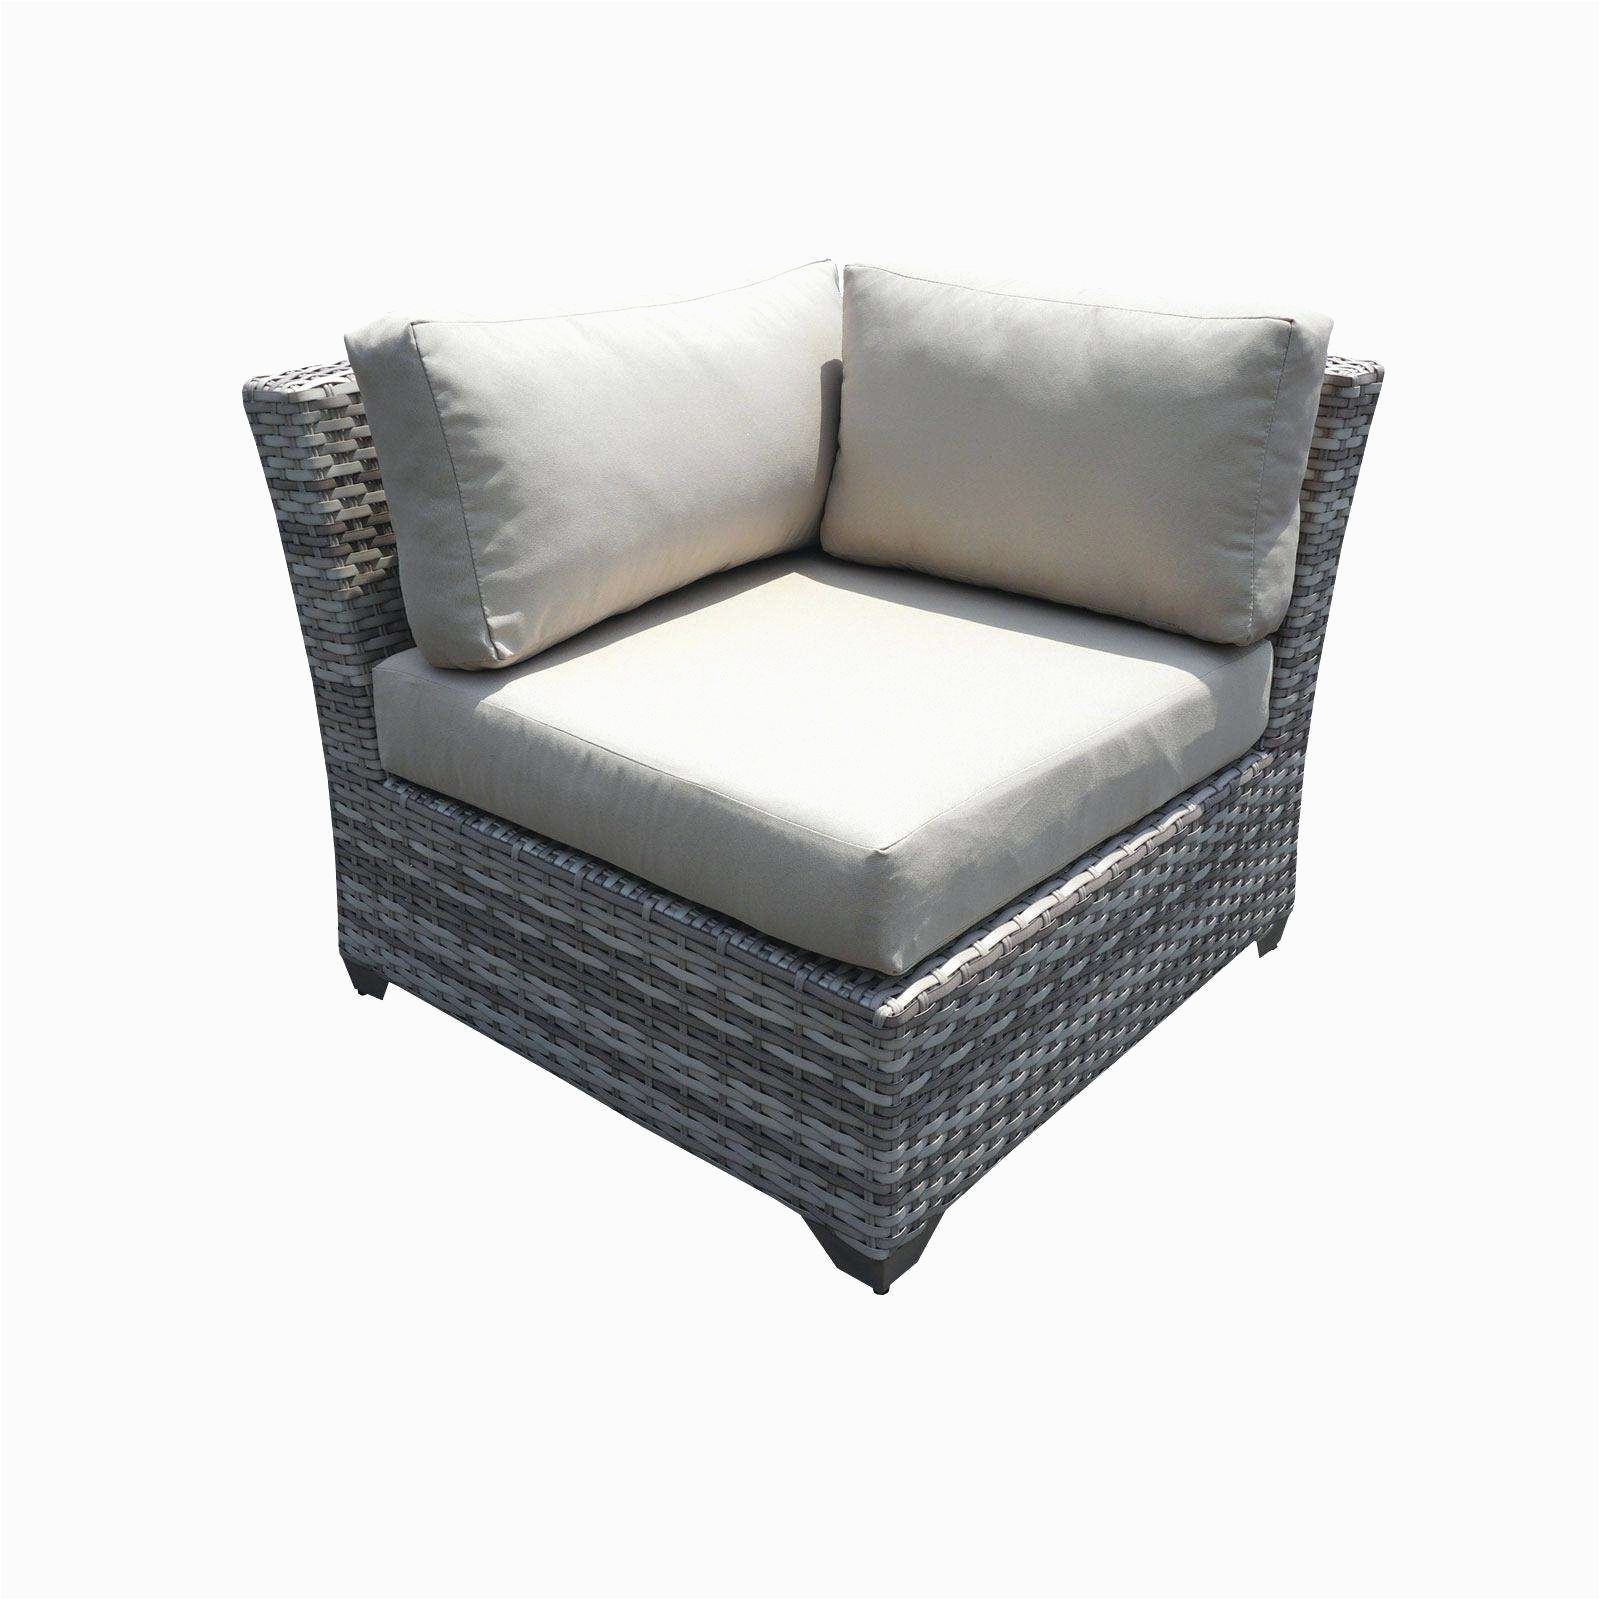 patio furniture stores near me lovely wicker outdoor sofa 0d patio chairs sale replacement cushions scheme